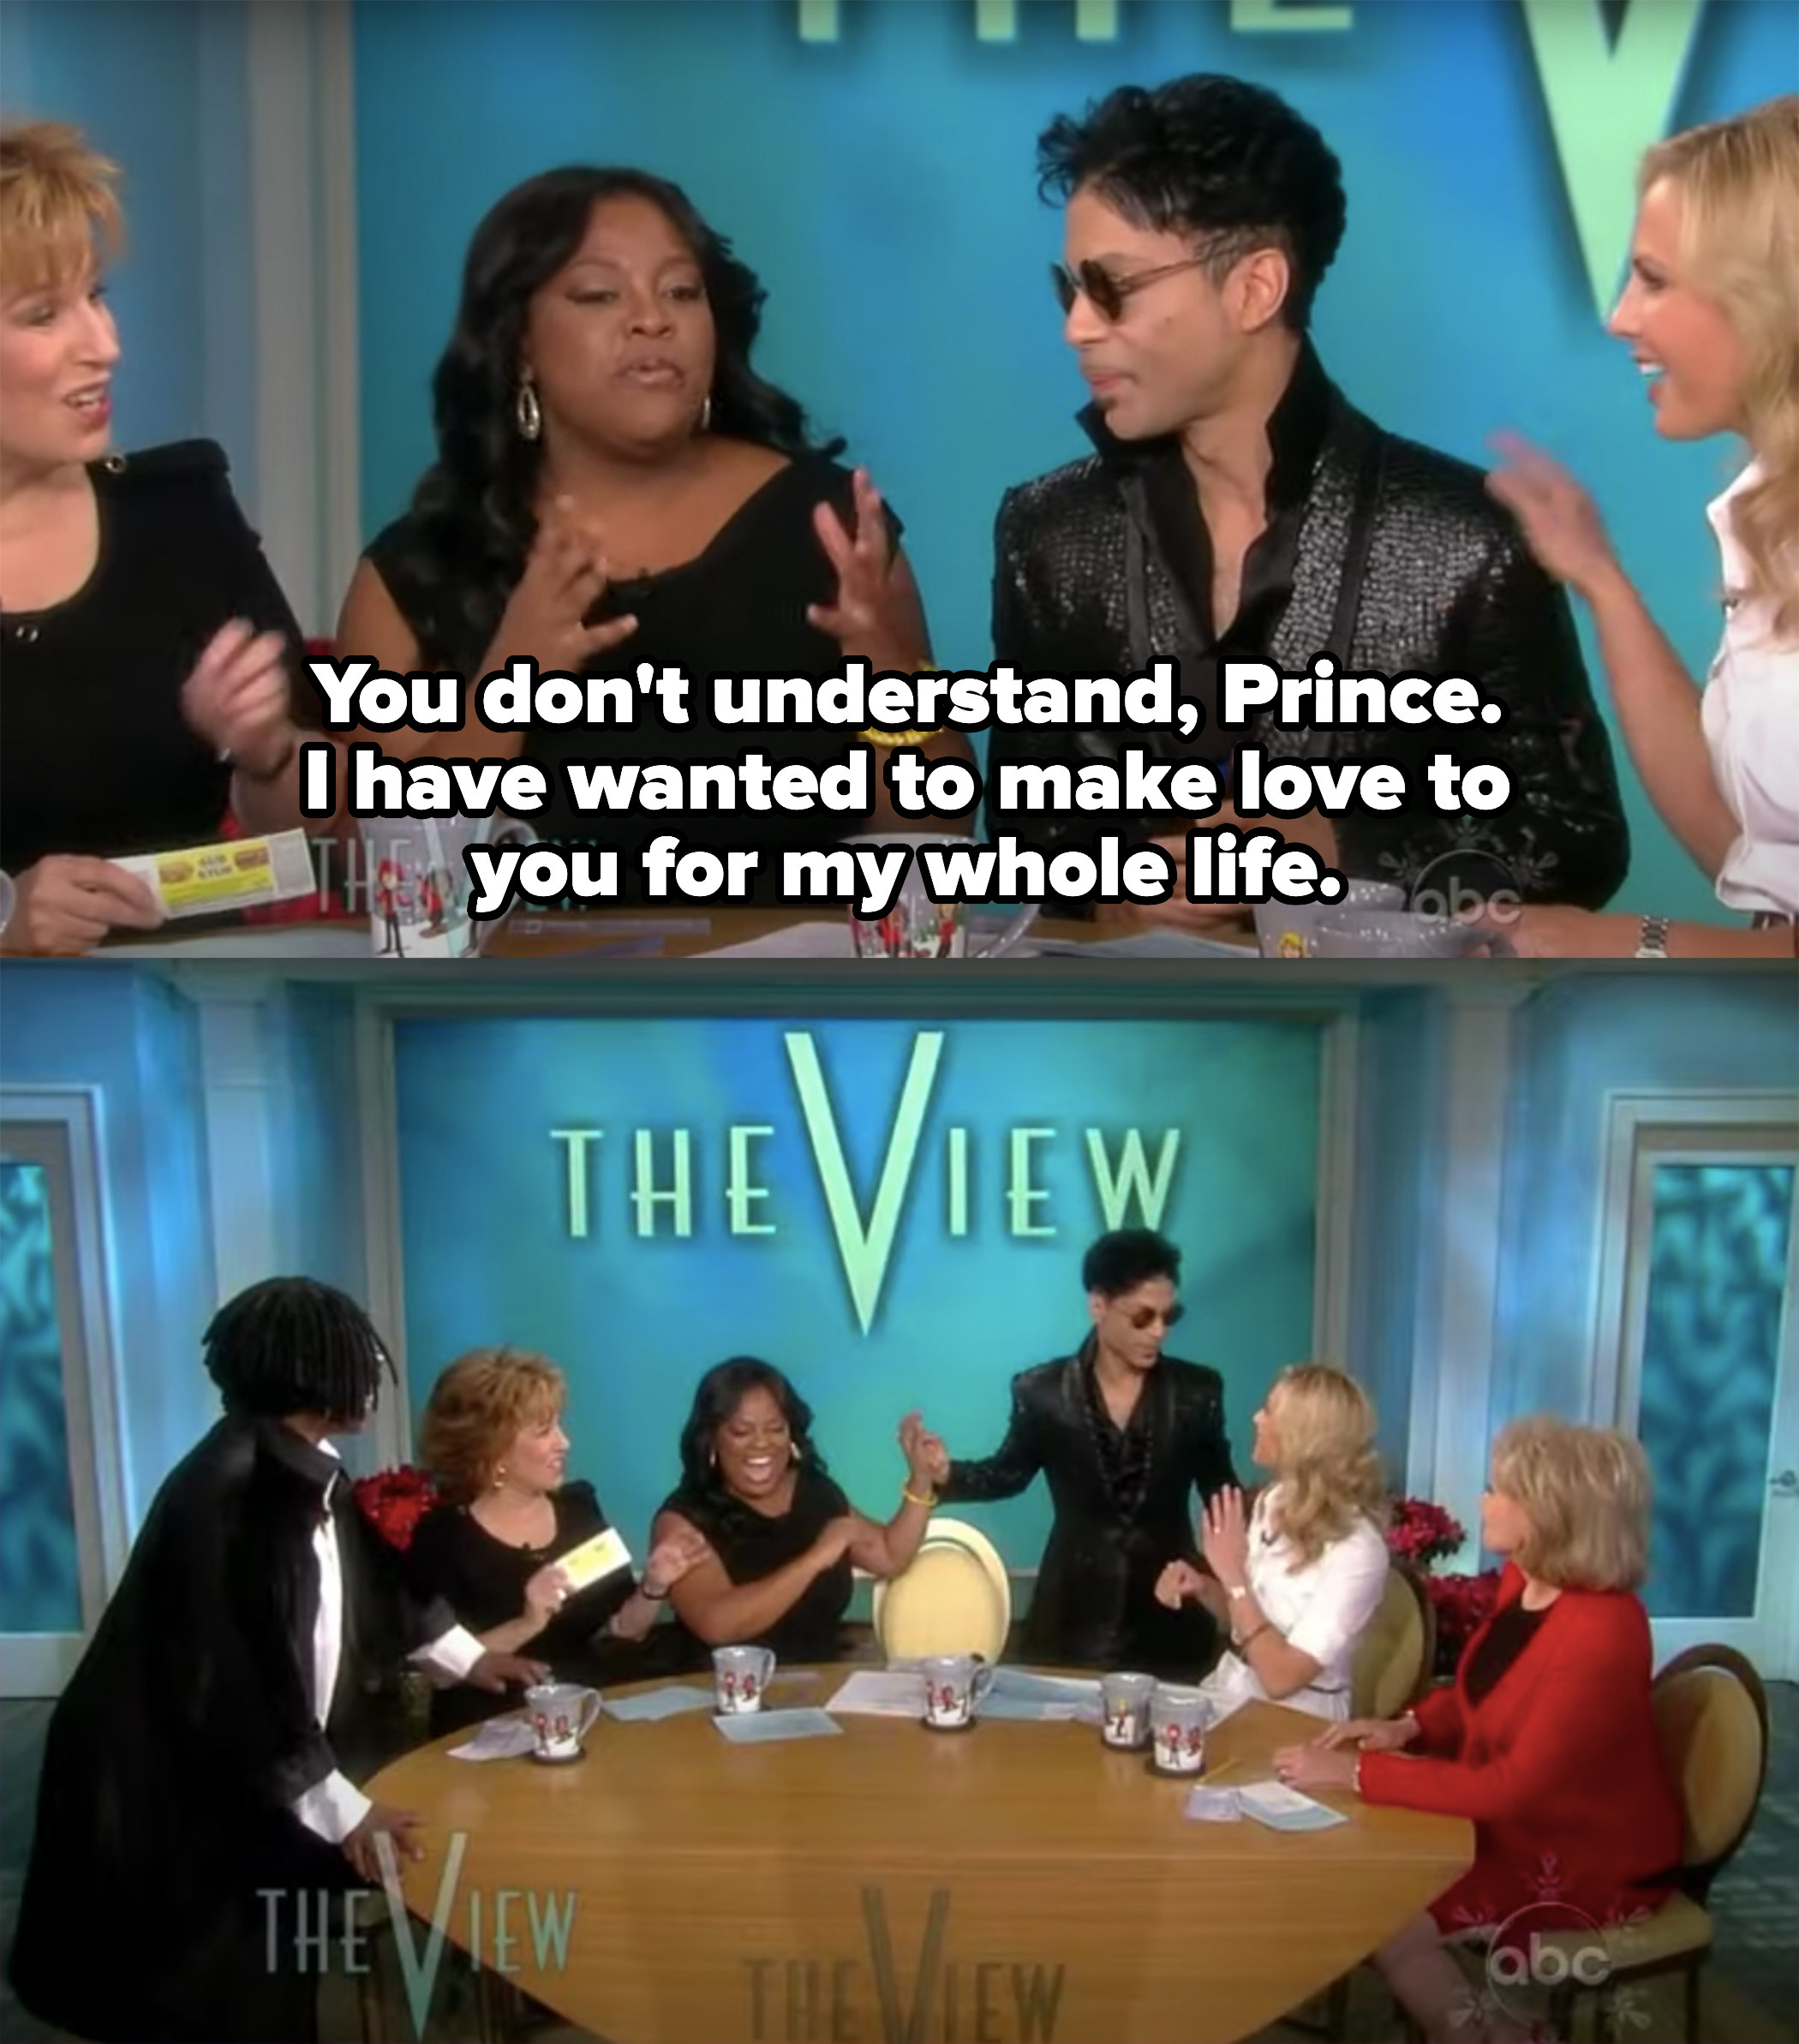 Prince getting up to leave during &quot;The View&quot;